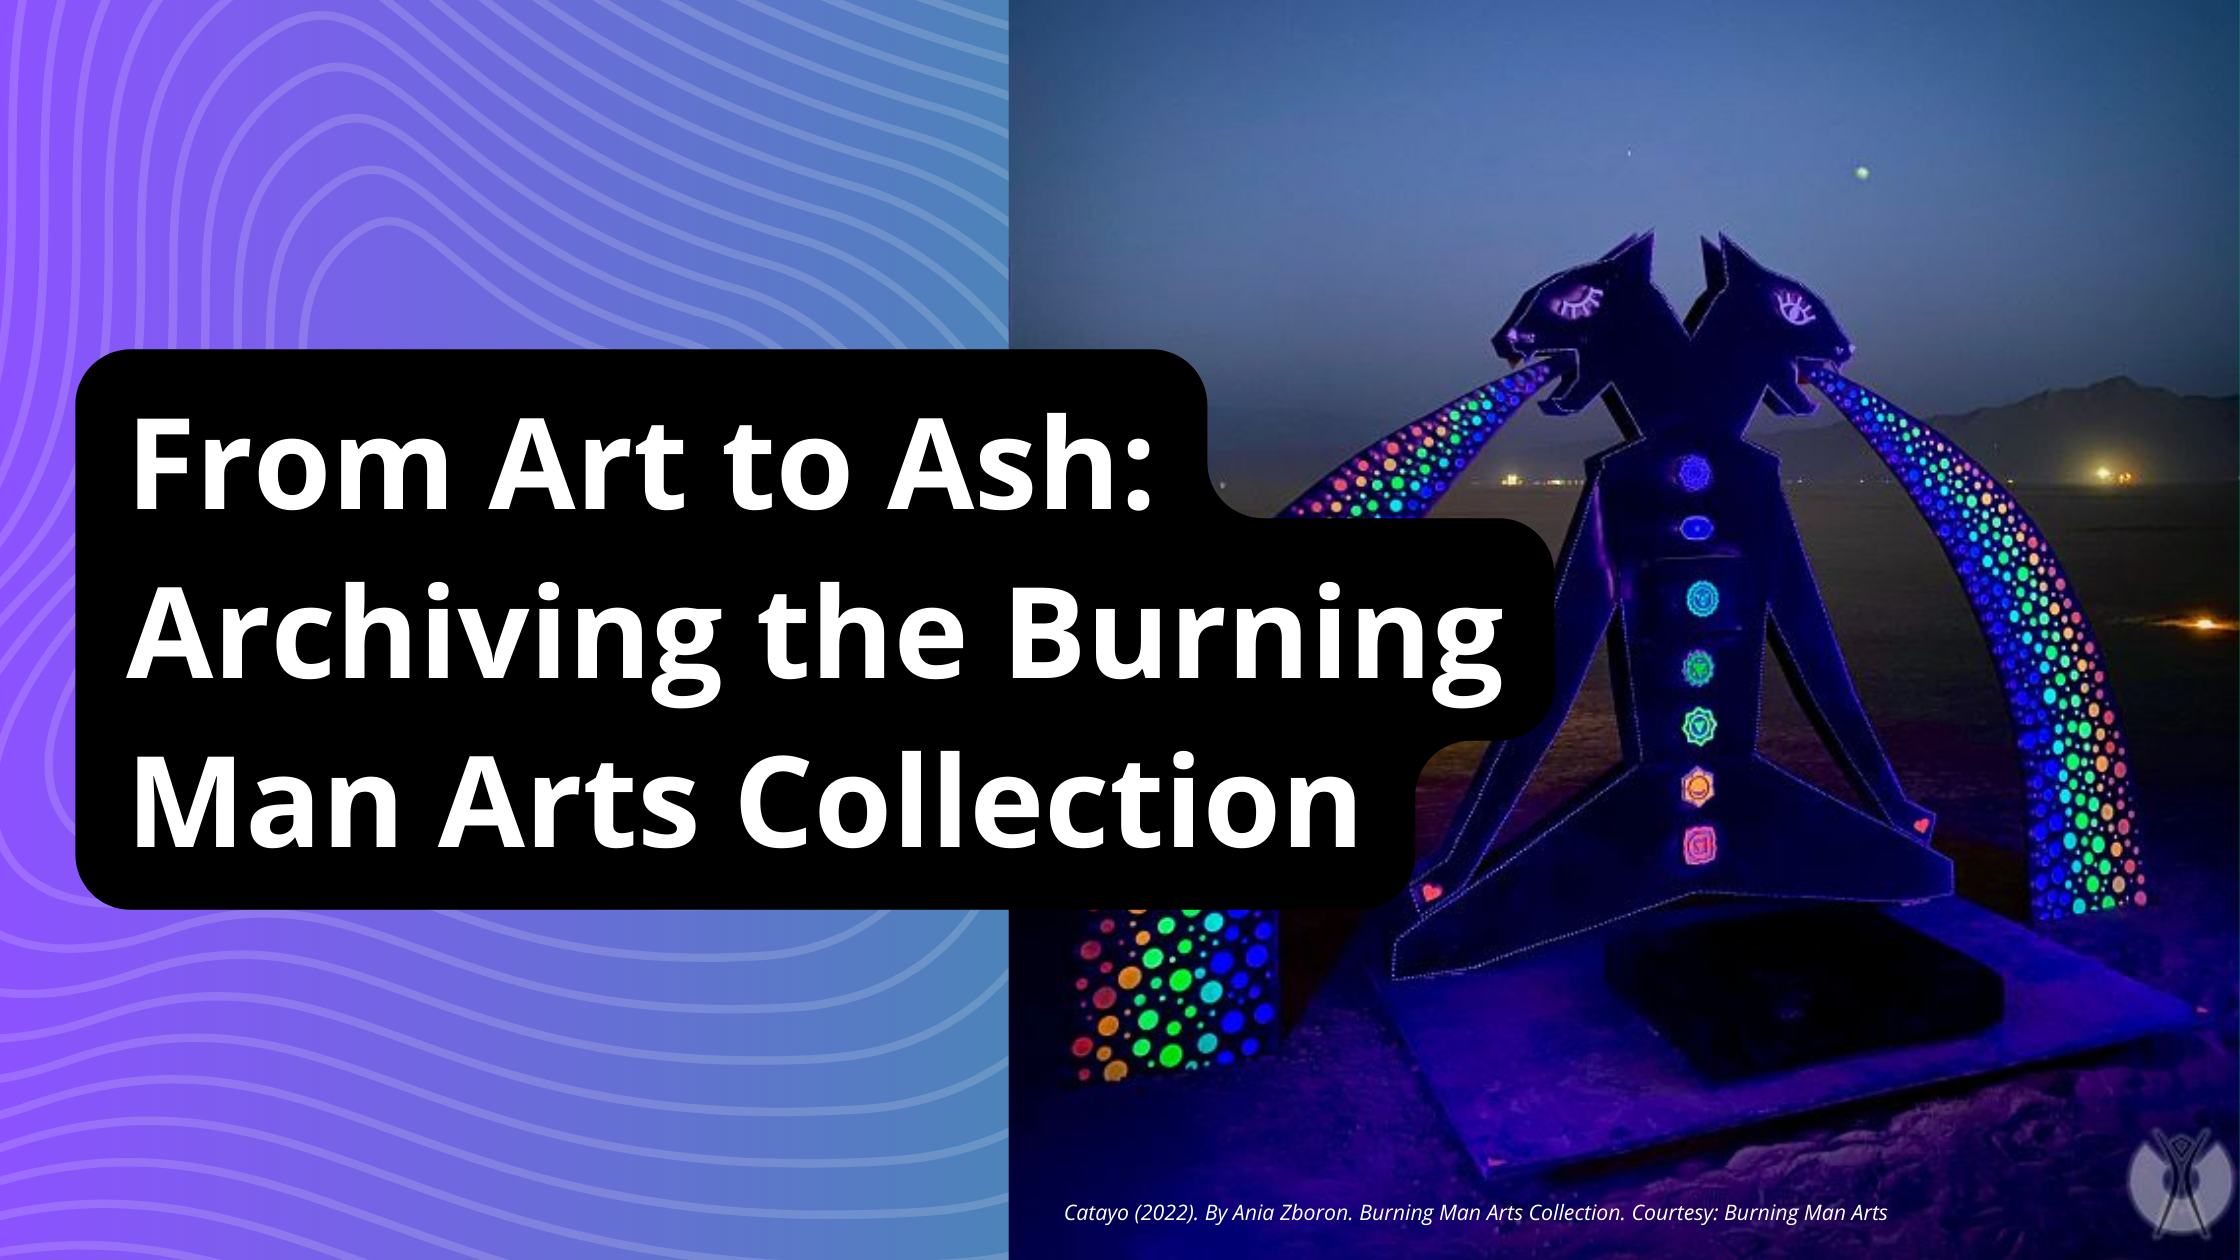 From Art to Ash: Archiving the Burning Man Arts Collection